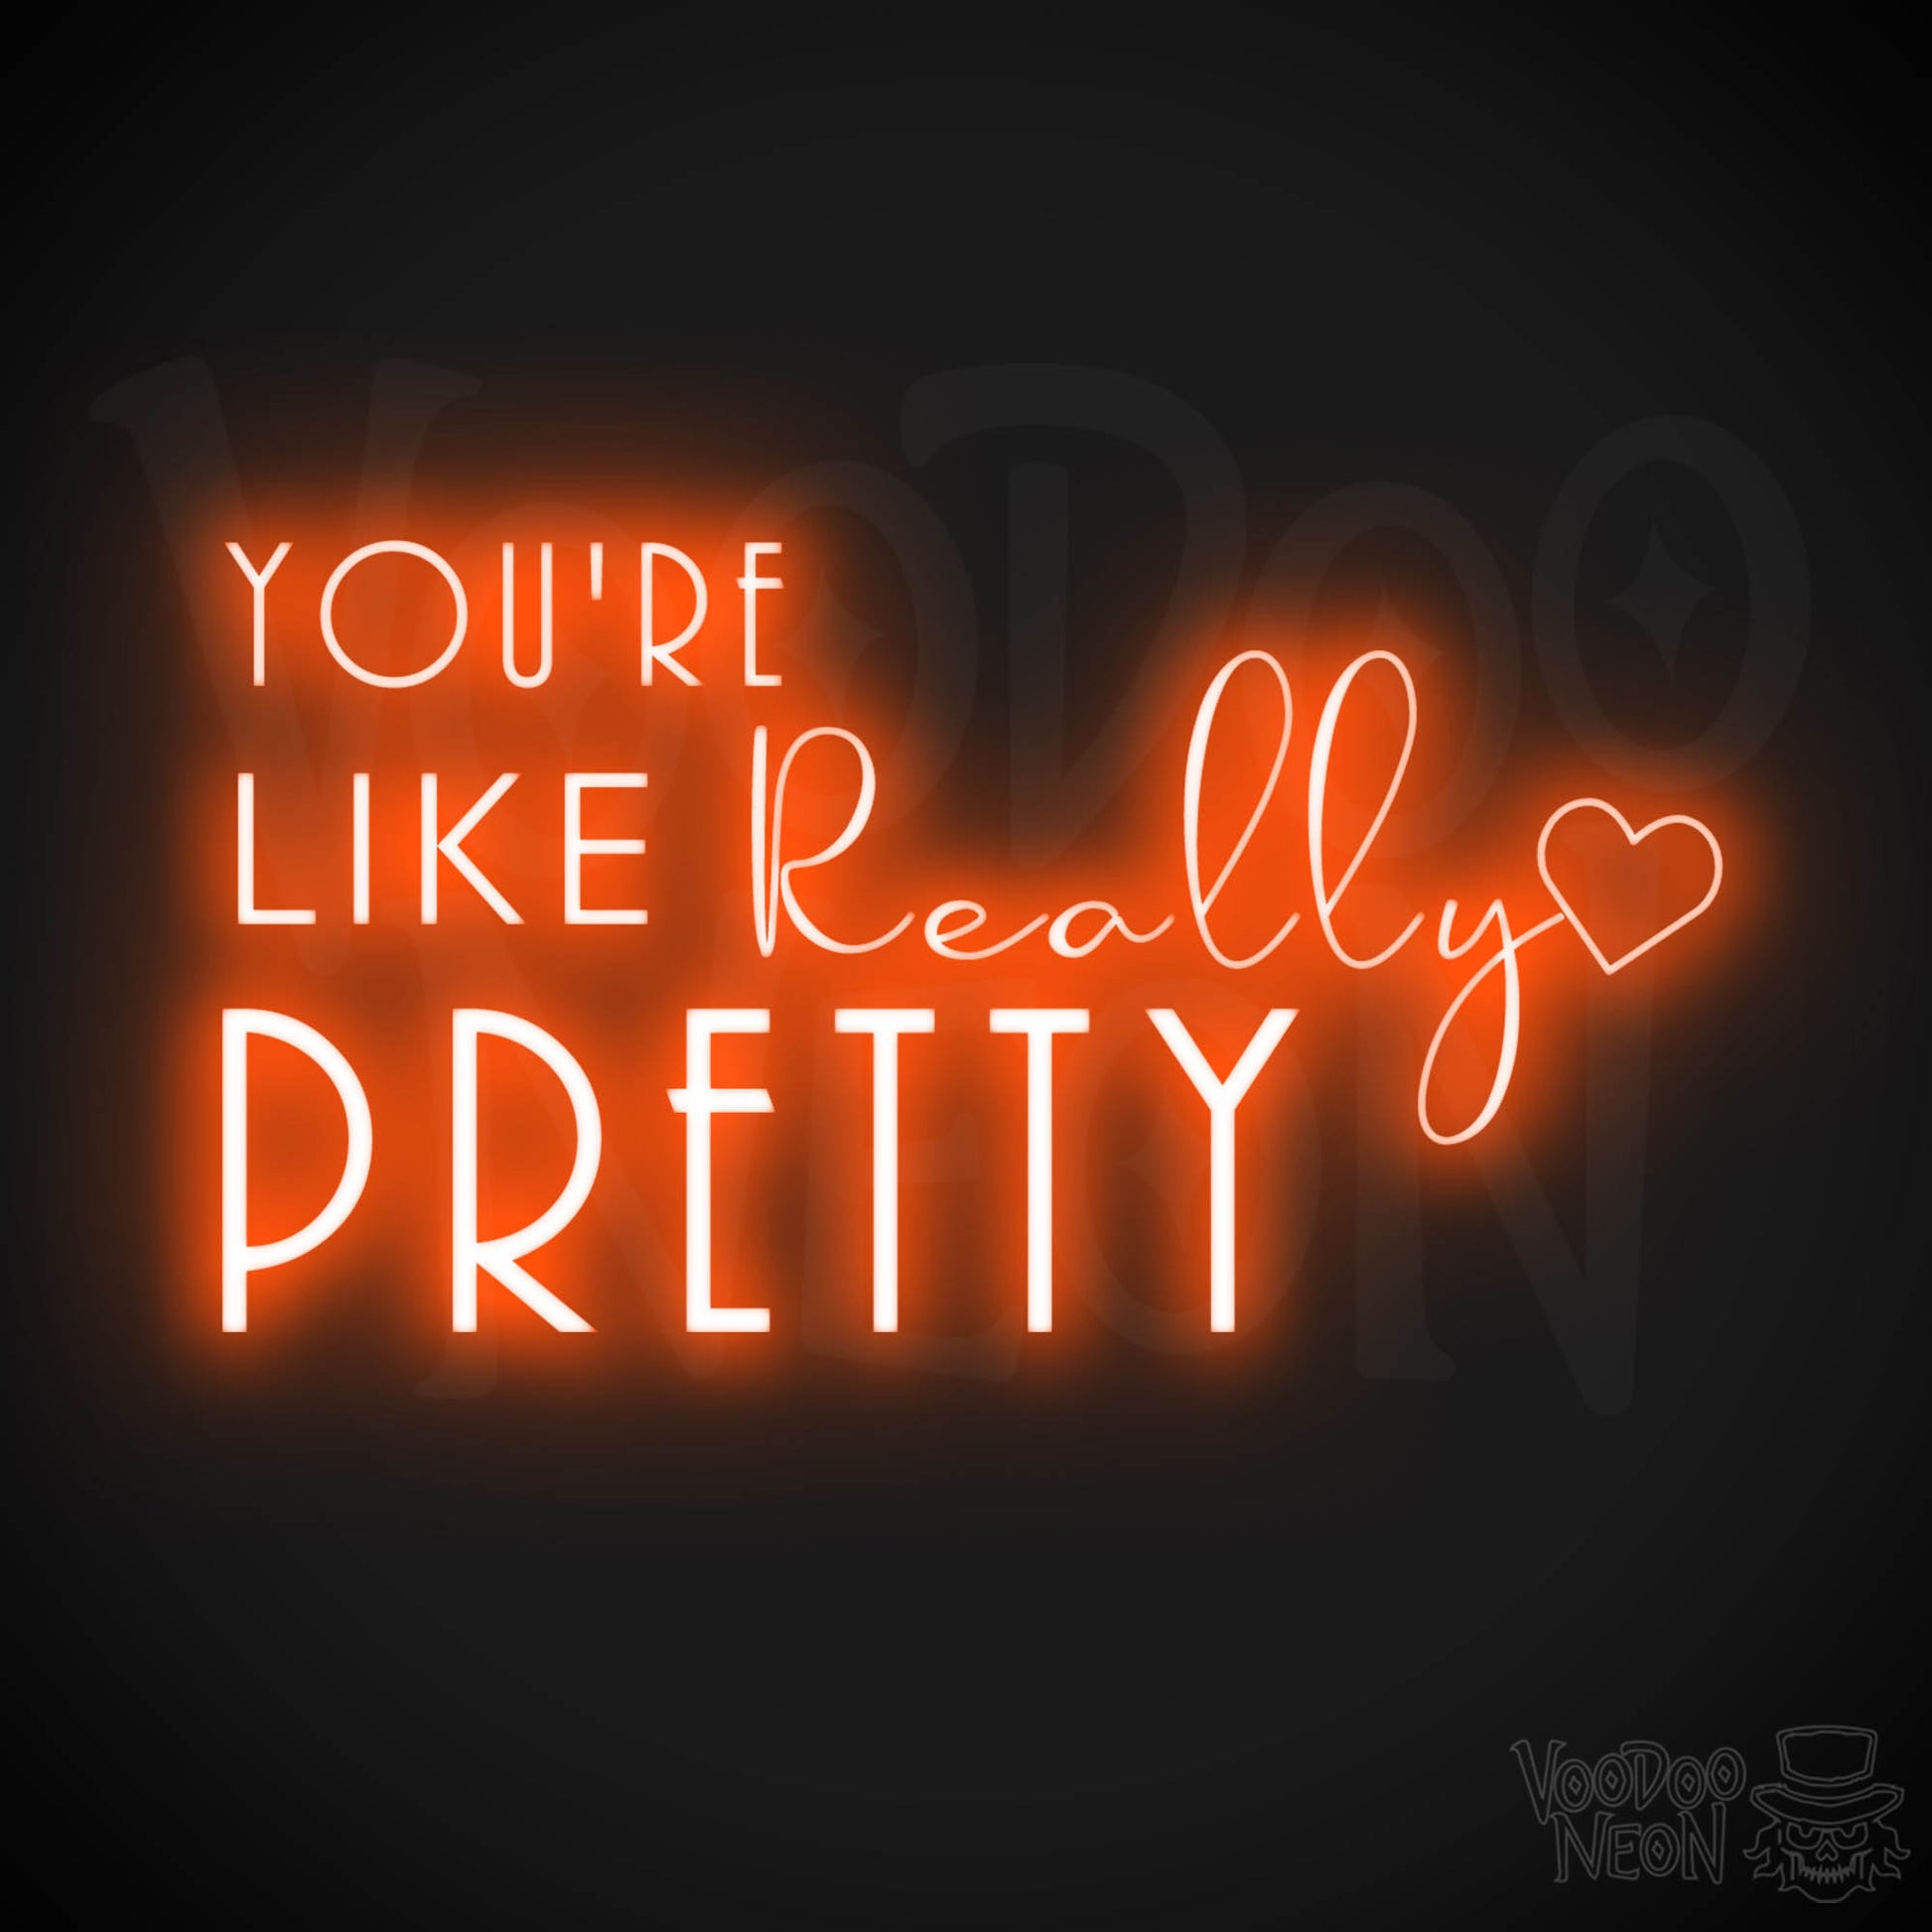 You're Like Really Pretty Neon Sign - Neon You're Like Really Pretty Sign - LED Wall Art - Color Orange